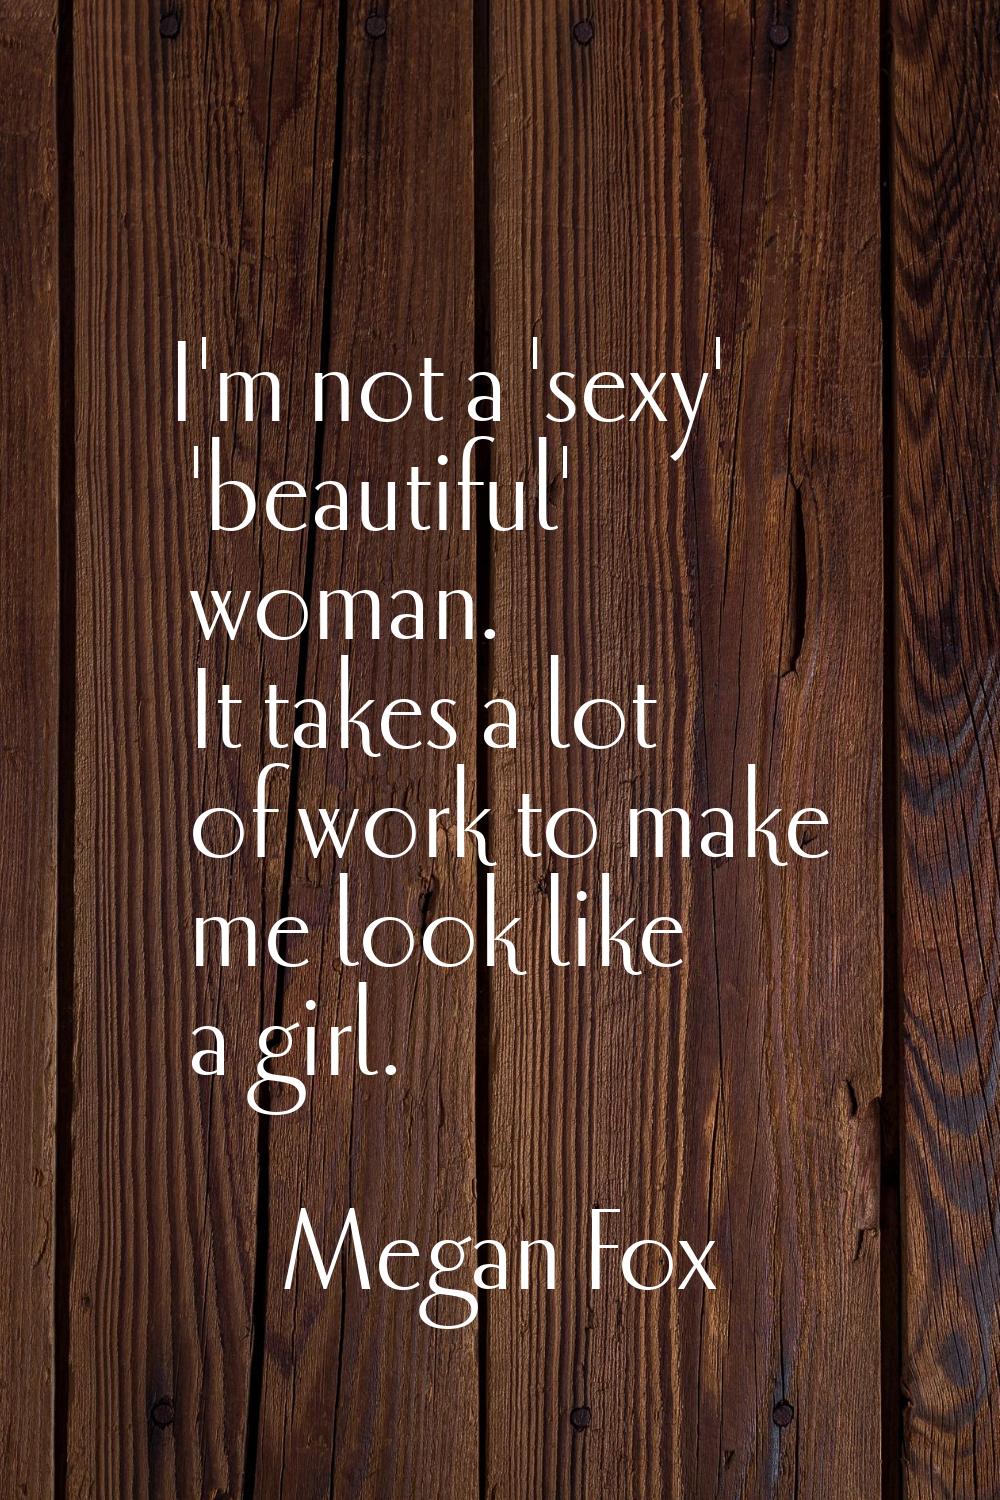 I'm not a 'sexy' 'beautiful' woman. It takes a lot of work to make me look like a girl.